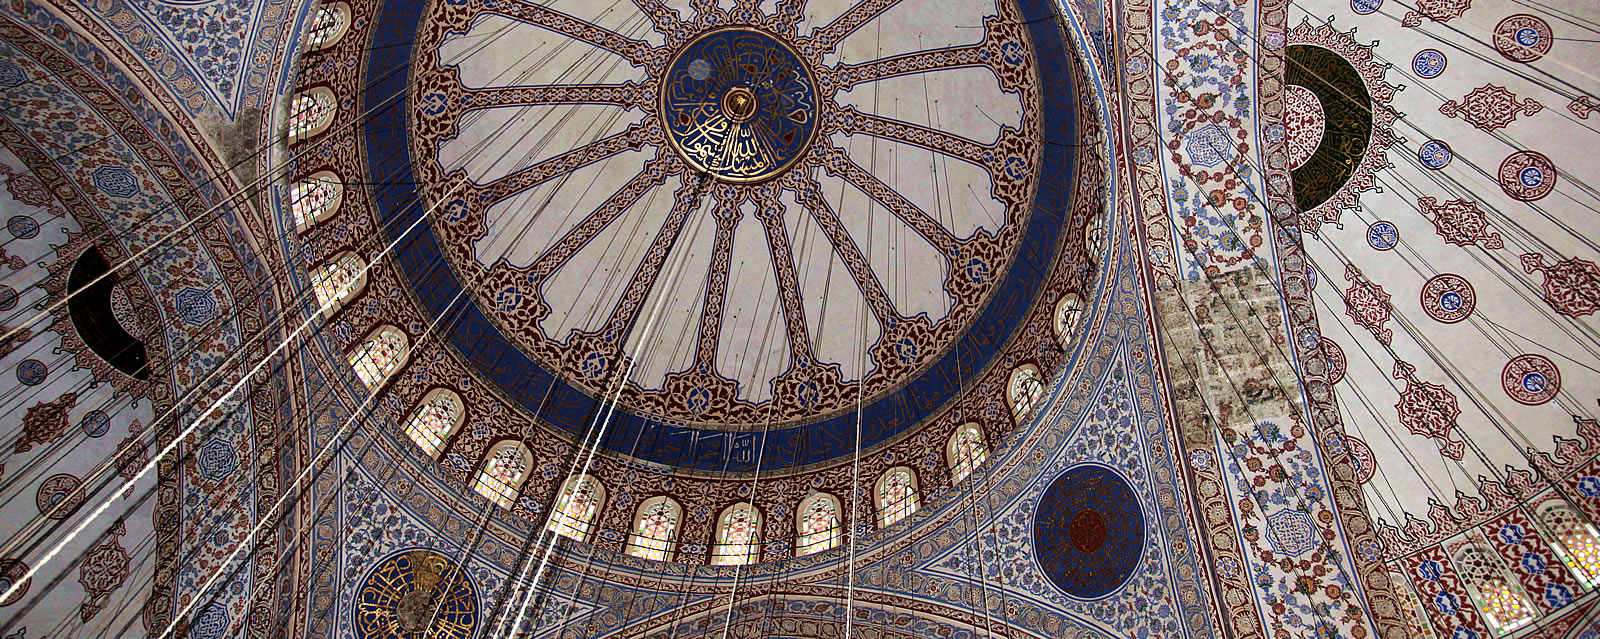 Ceiling of Blue Mosque in Istanbul